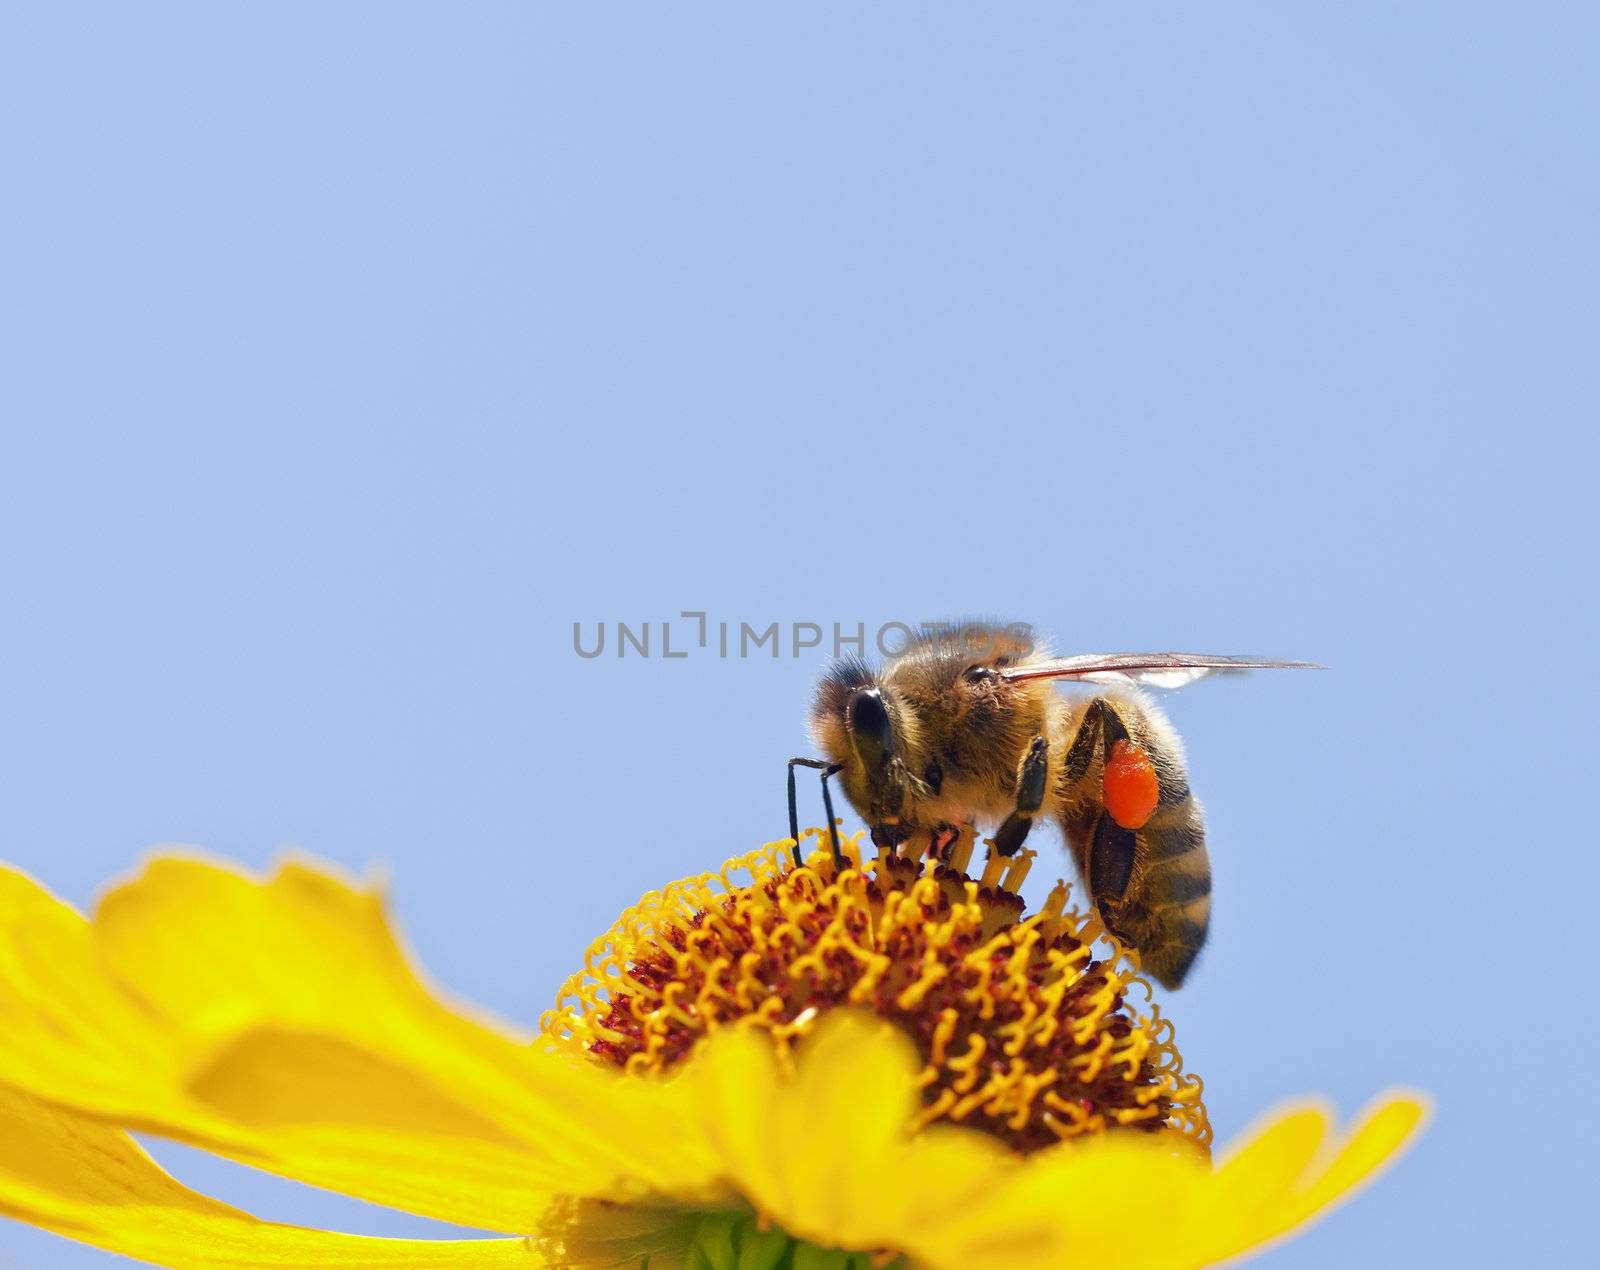 An image of a beautiful little bee on a yellow flower